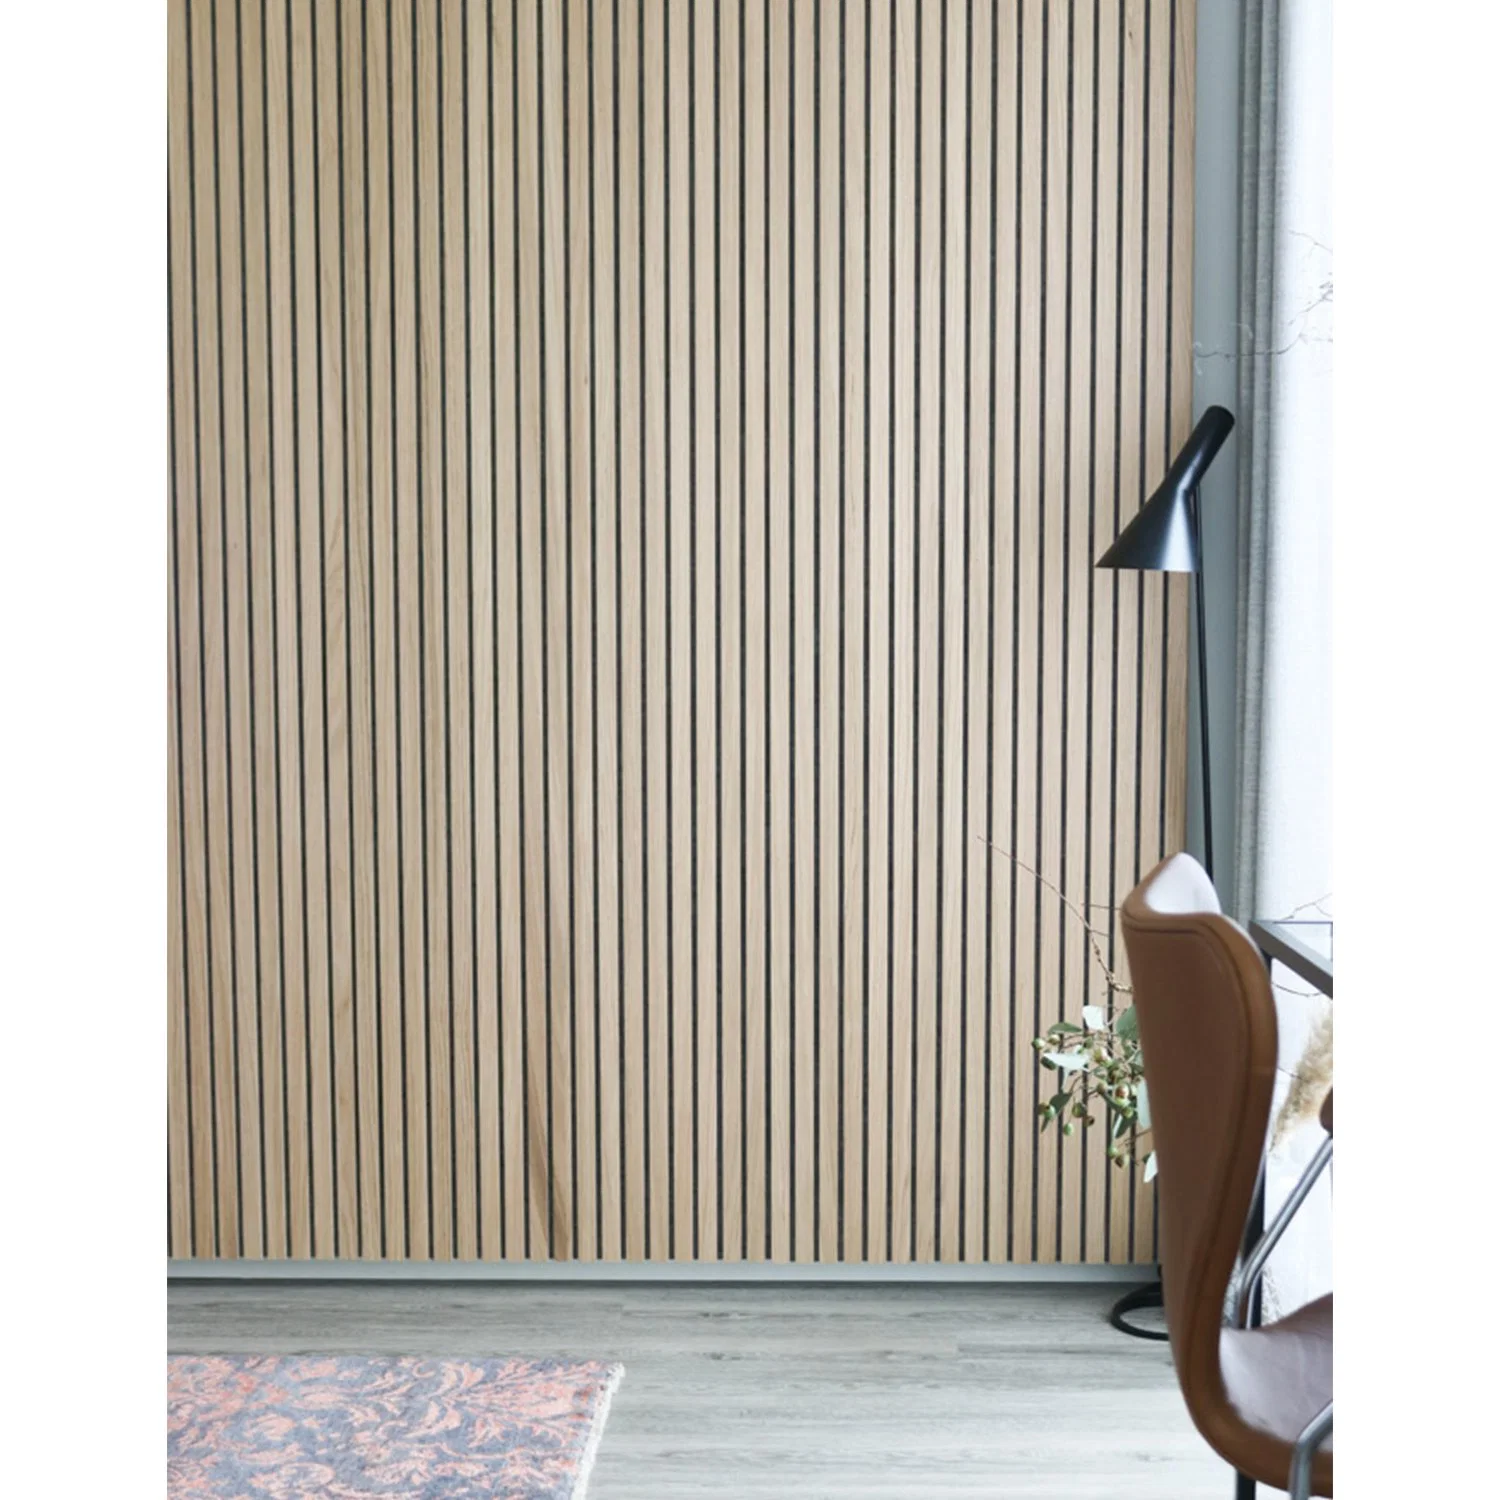 Natural Oak Acoustic Panel with High quality/High cost performance  Sound Absorbing Material Slat Wood Wall Panels